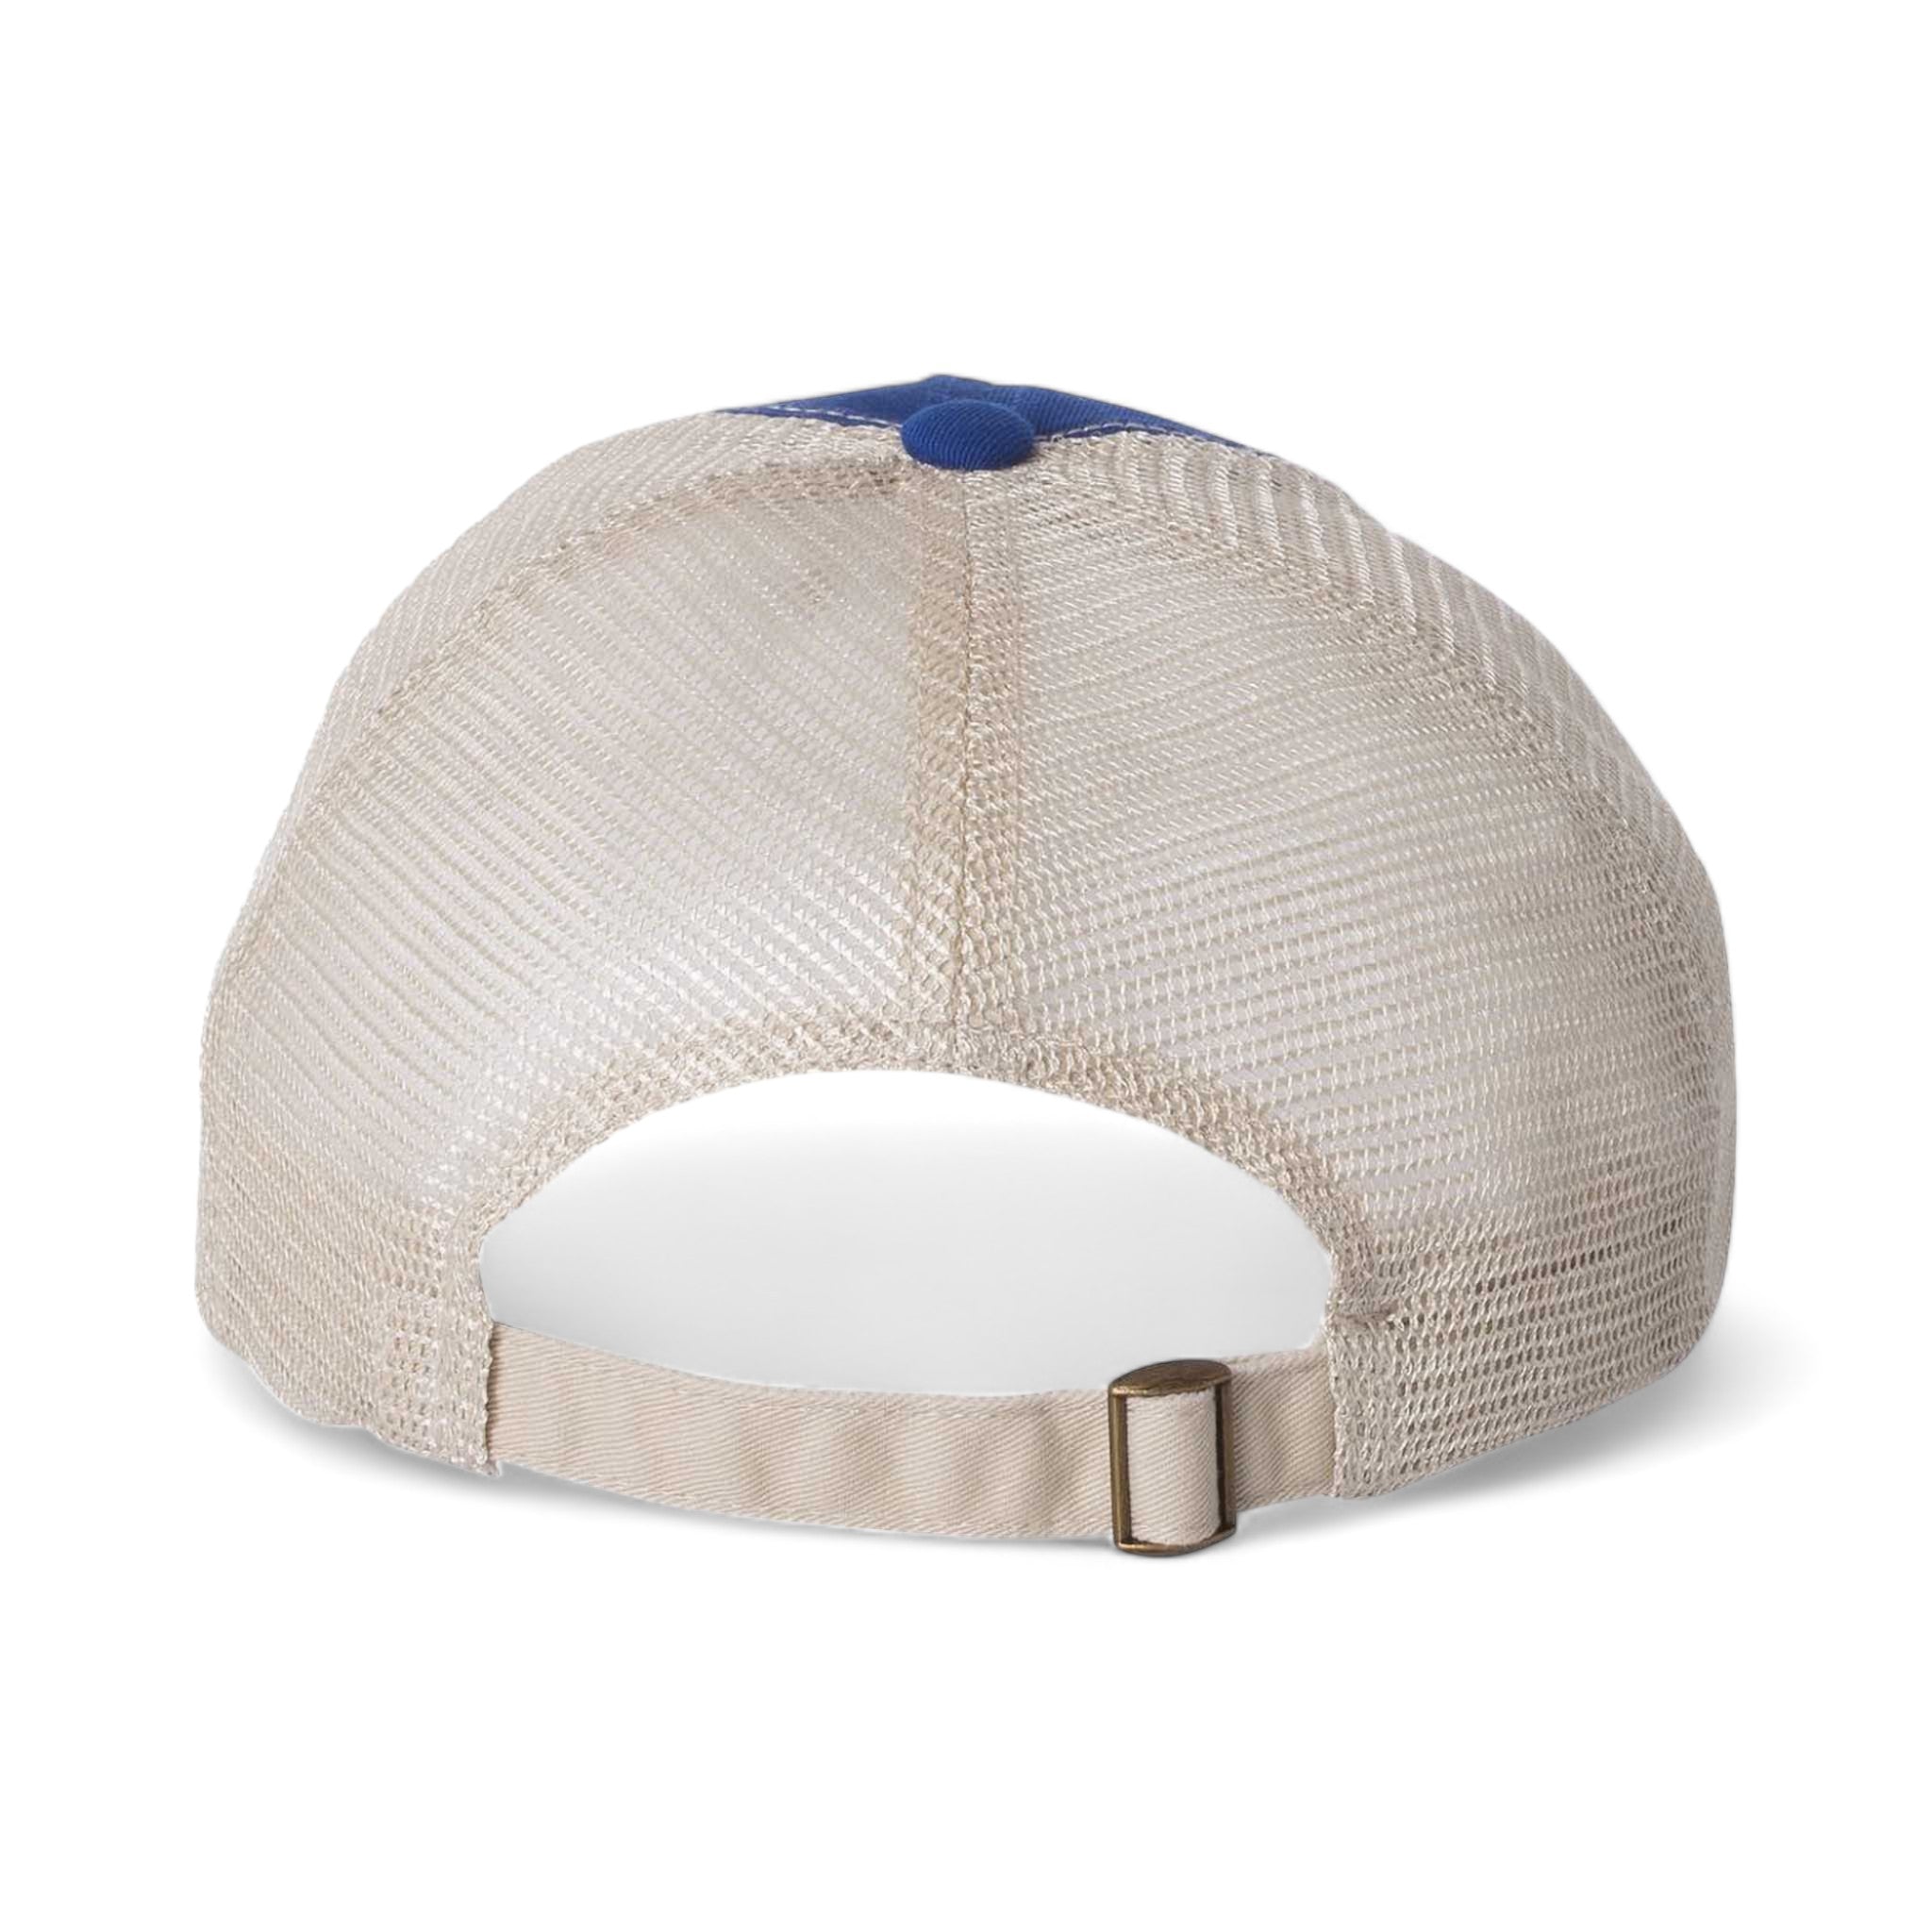 Back view of Sportsman 3100 custom hat in royal and stone